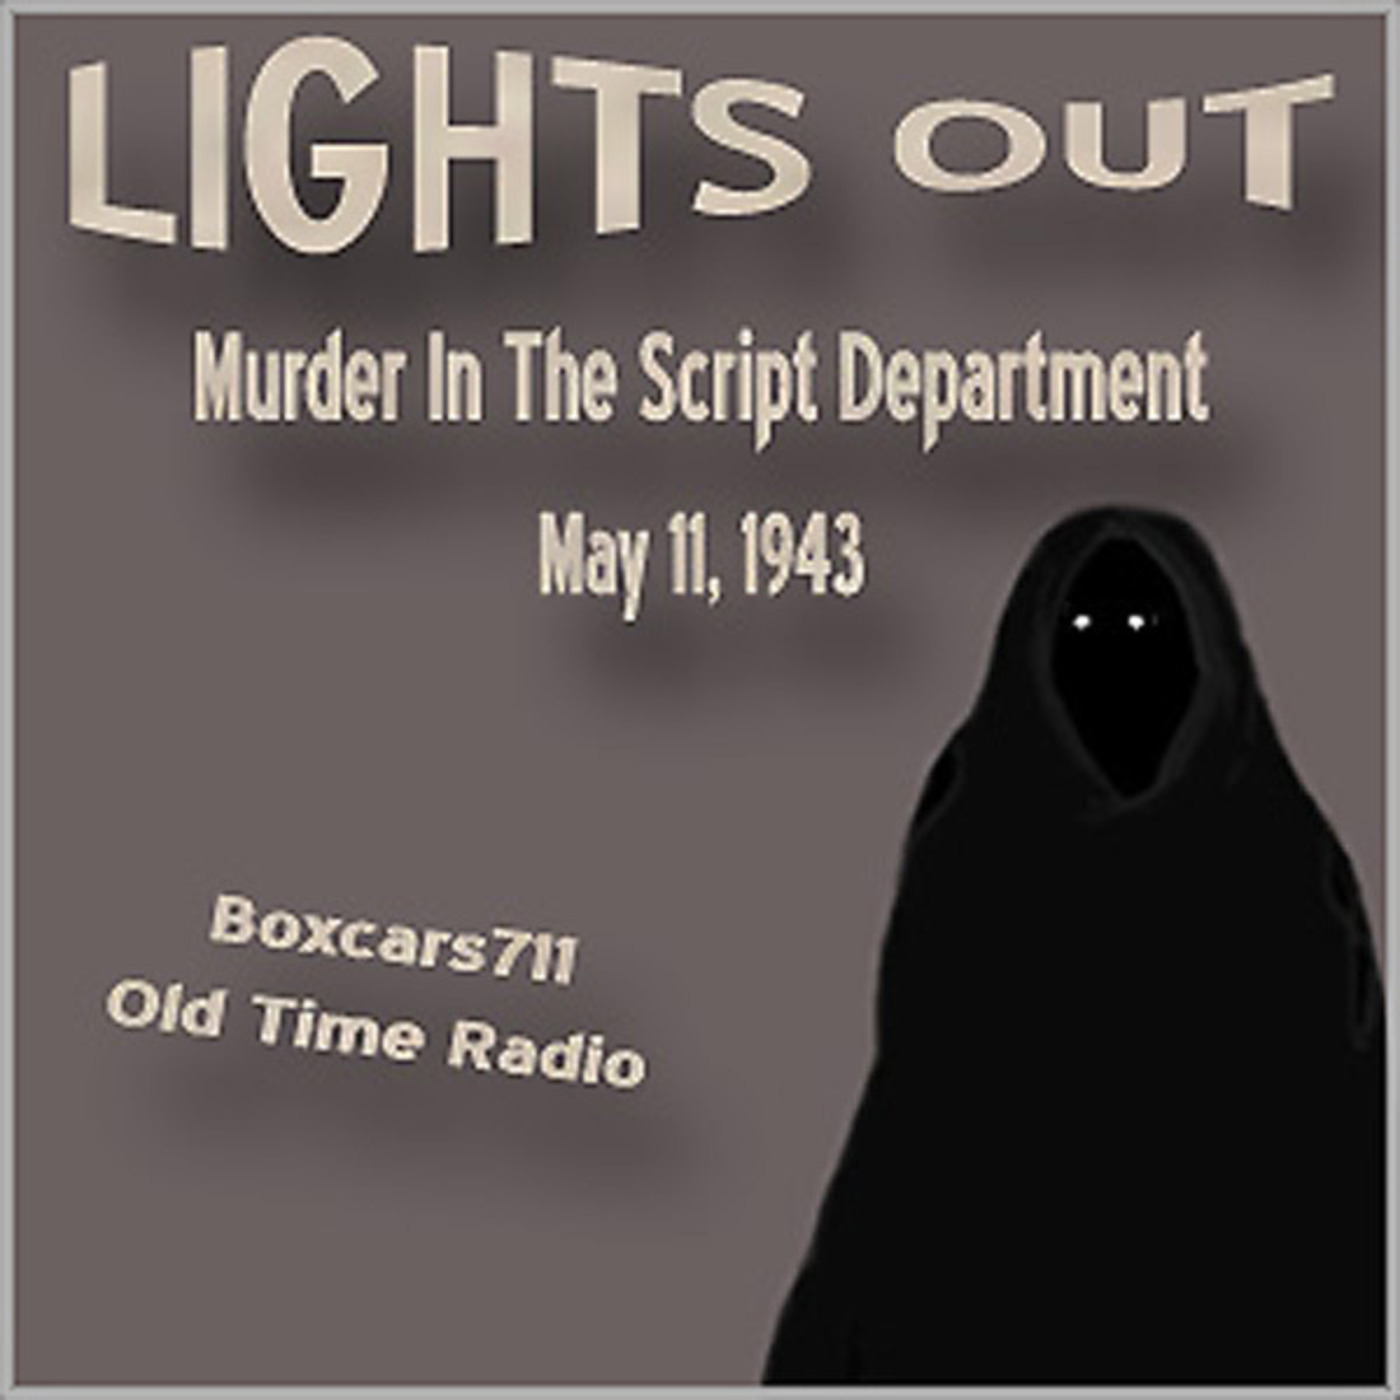 Episode 9472: Lights Out - 